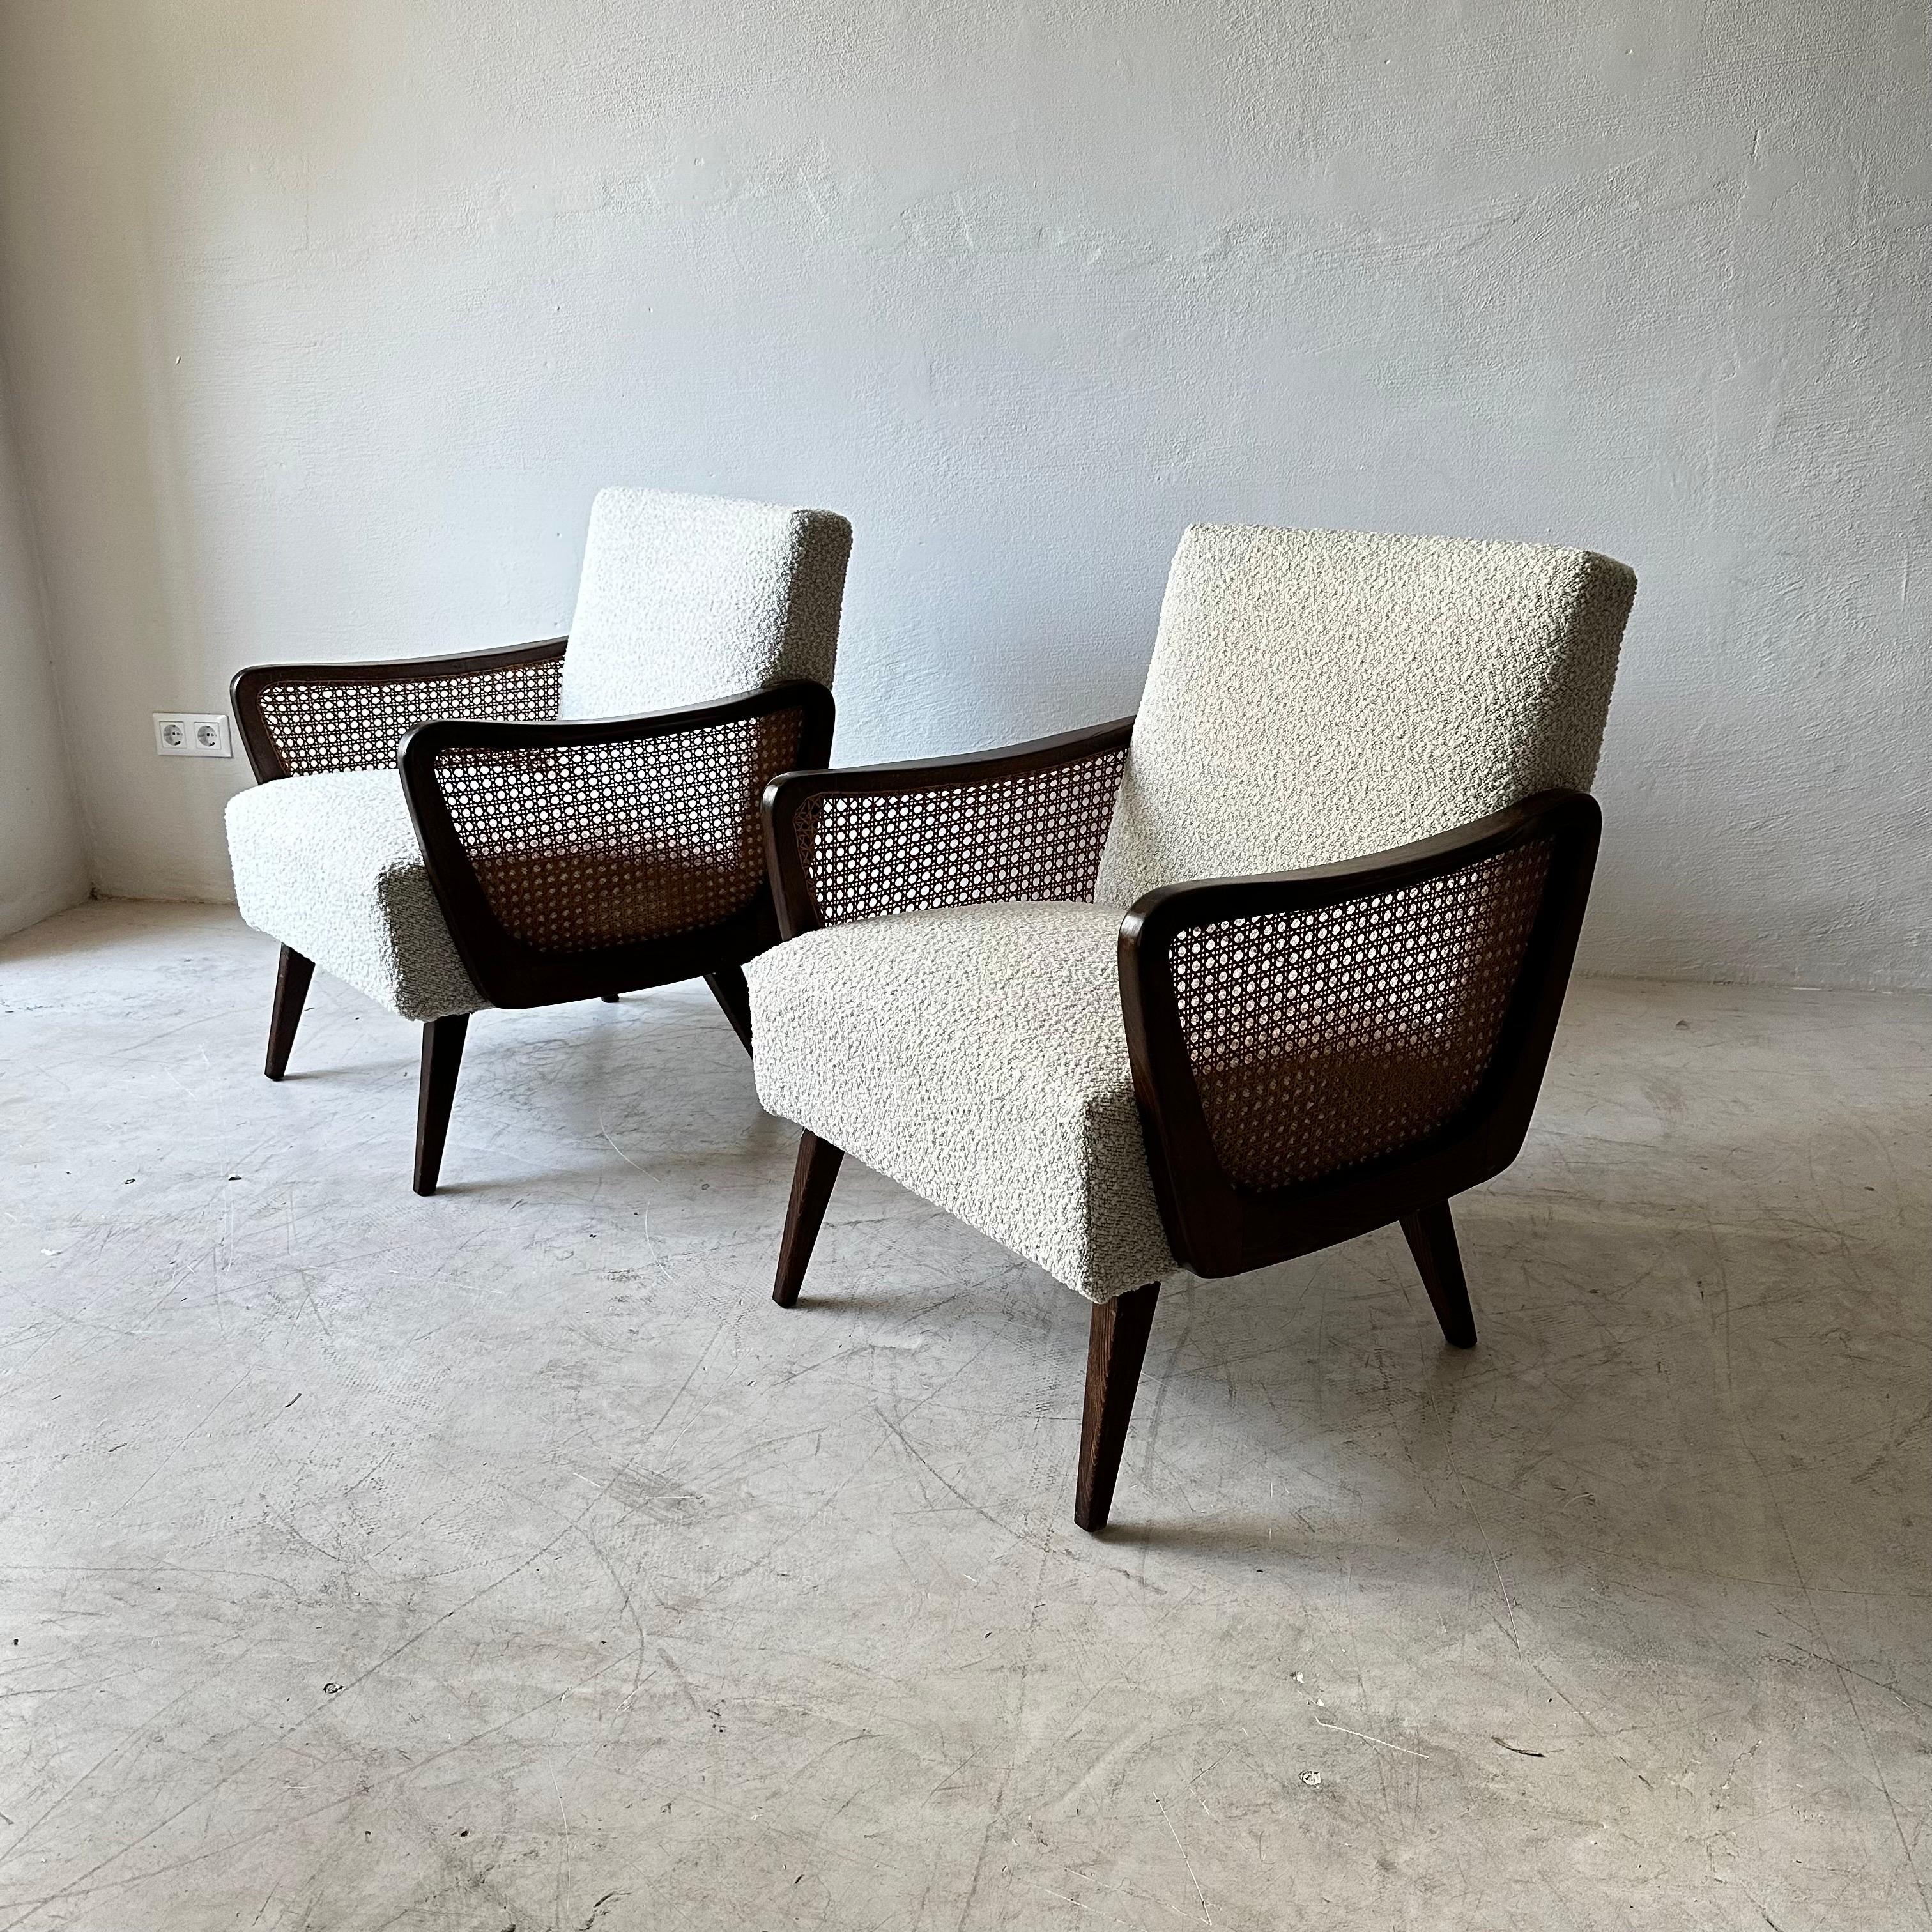 Austrian Arm Chairs in Boucle and Wicker, 1950s For Sale 1